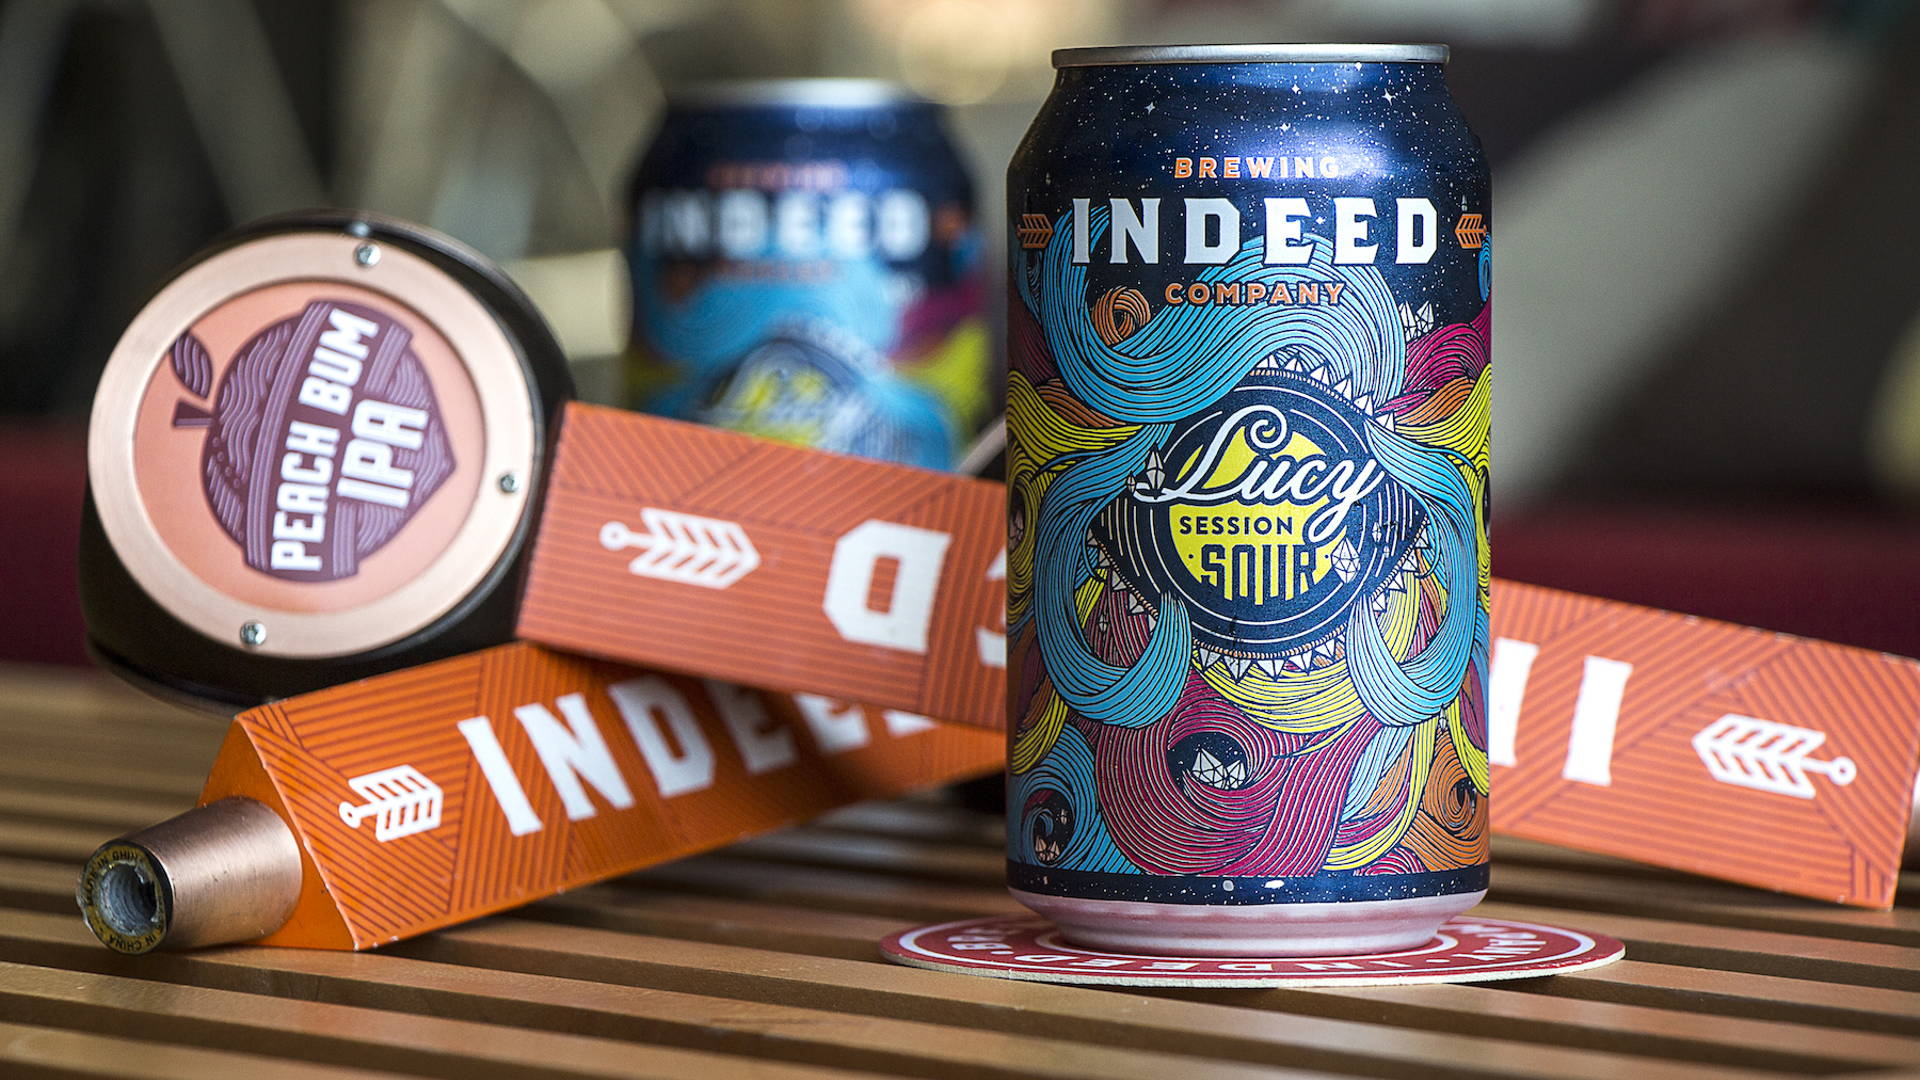 Featured image for Check out Indeed Brewing Company’s Fantastical, Whimsical Packaging Design